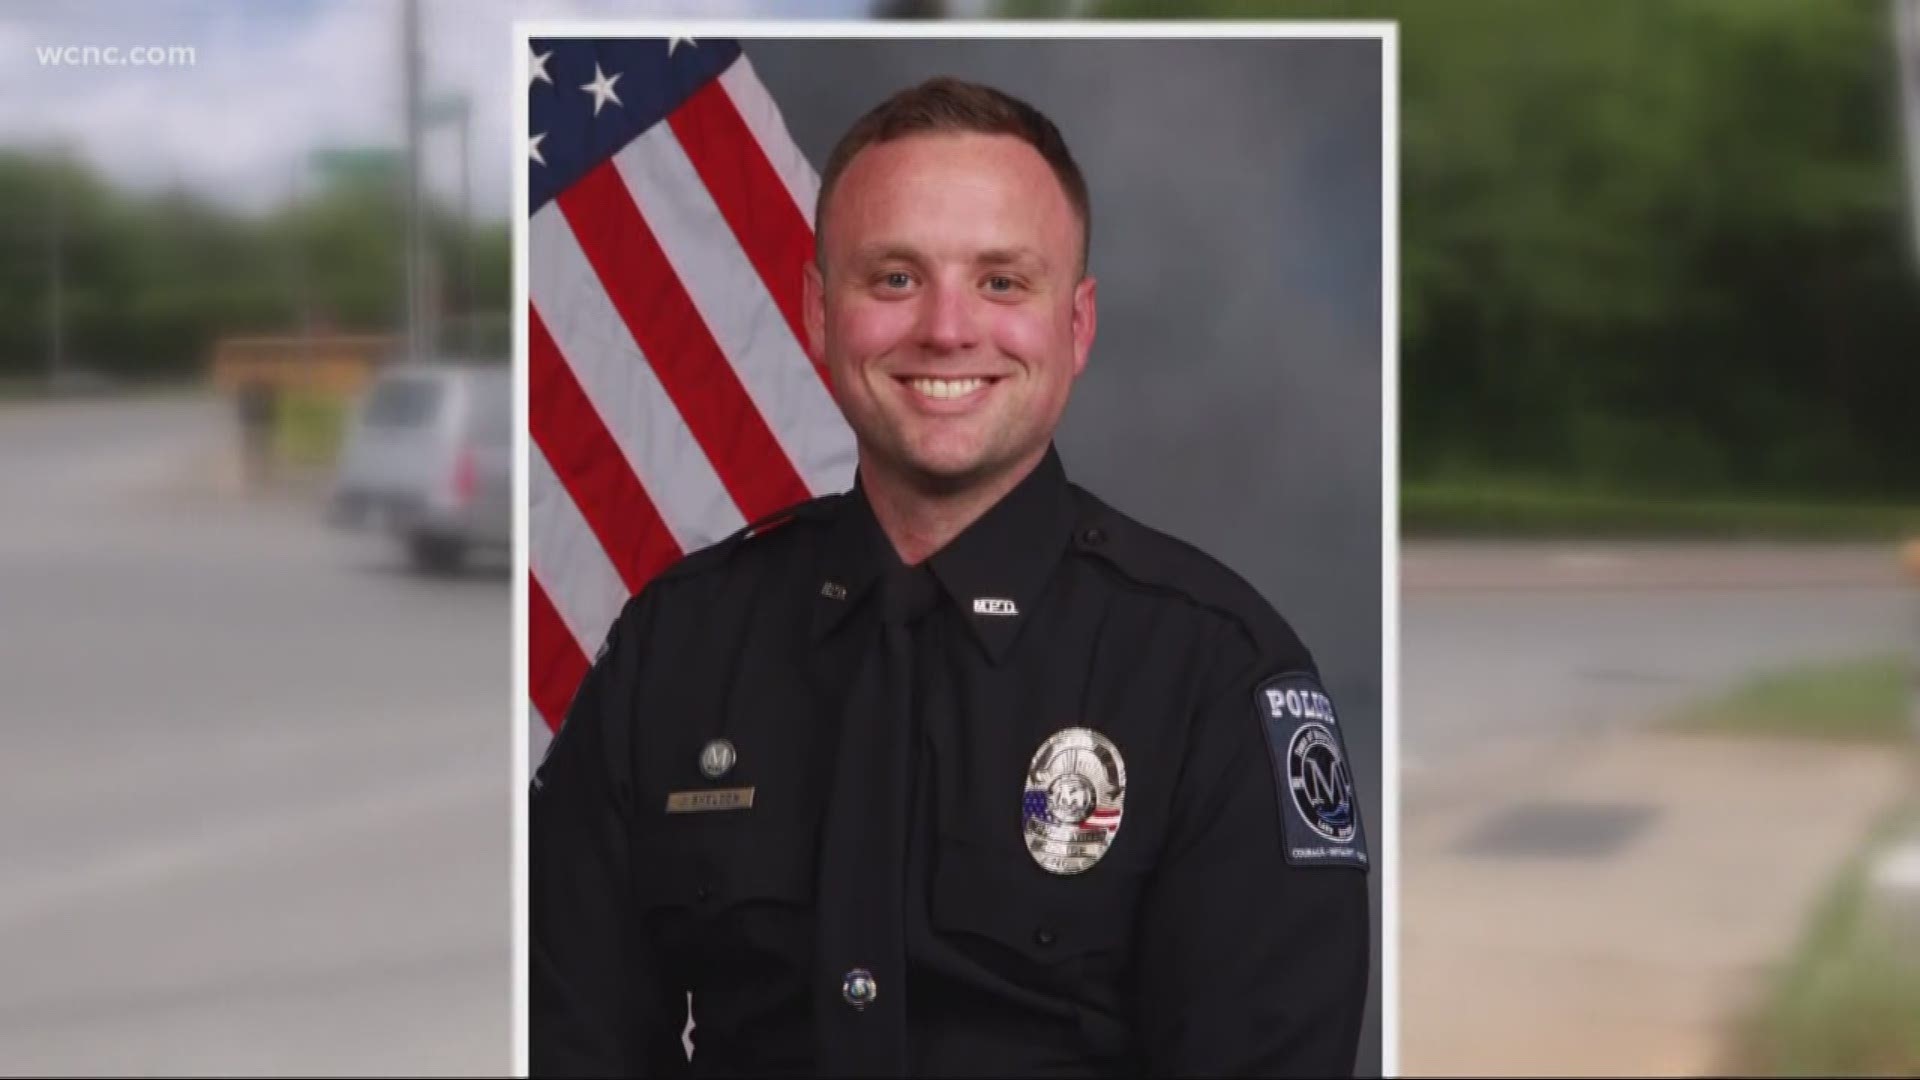 Mooresville K9 Officer Jordan Sheldon was shot and killed during a traffic stop on May 4. Police say the driver of that vehicle, Michael Aldana, later committed suicide in his own apartment.